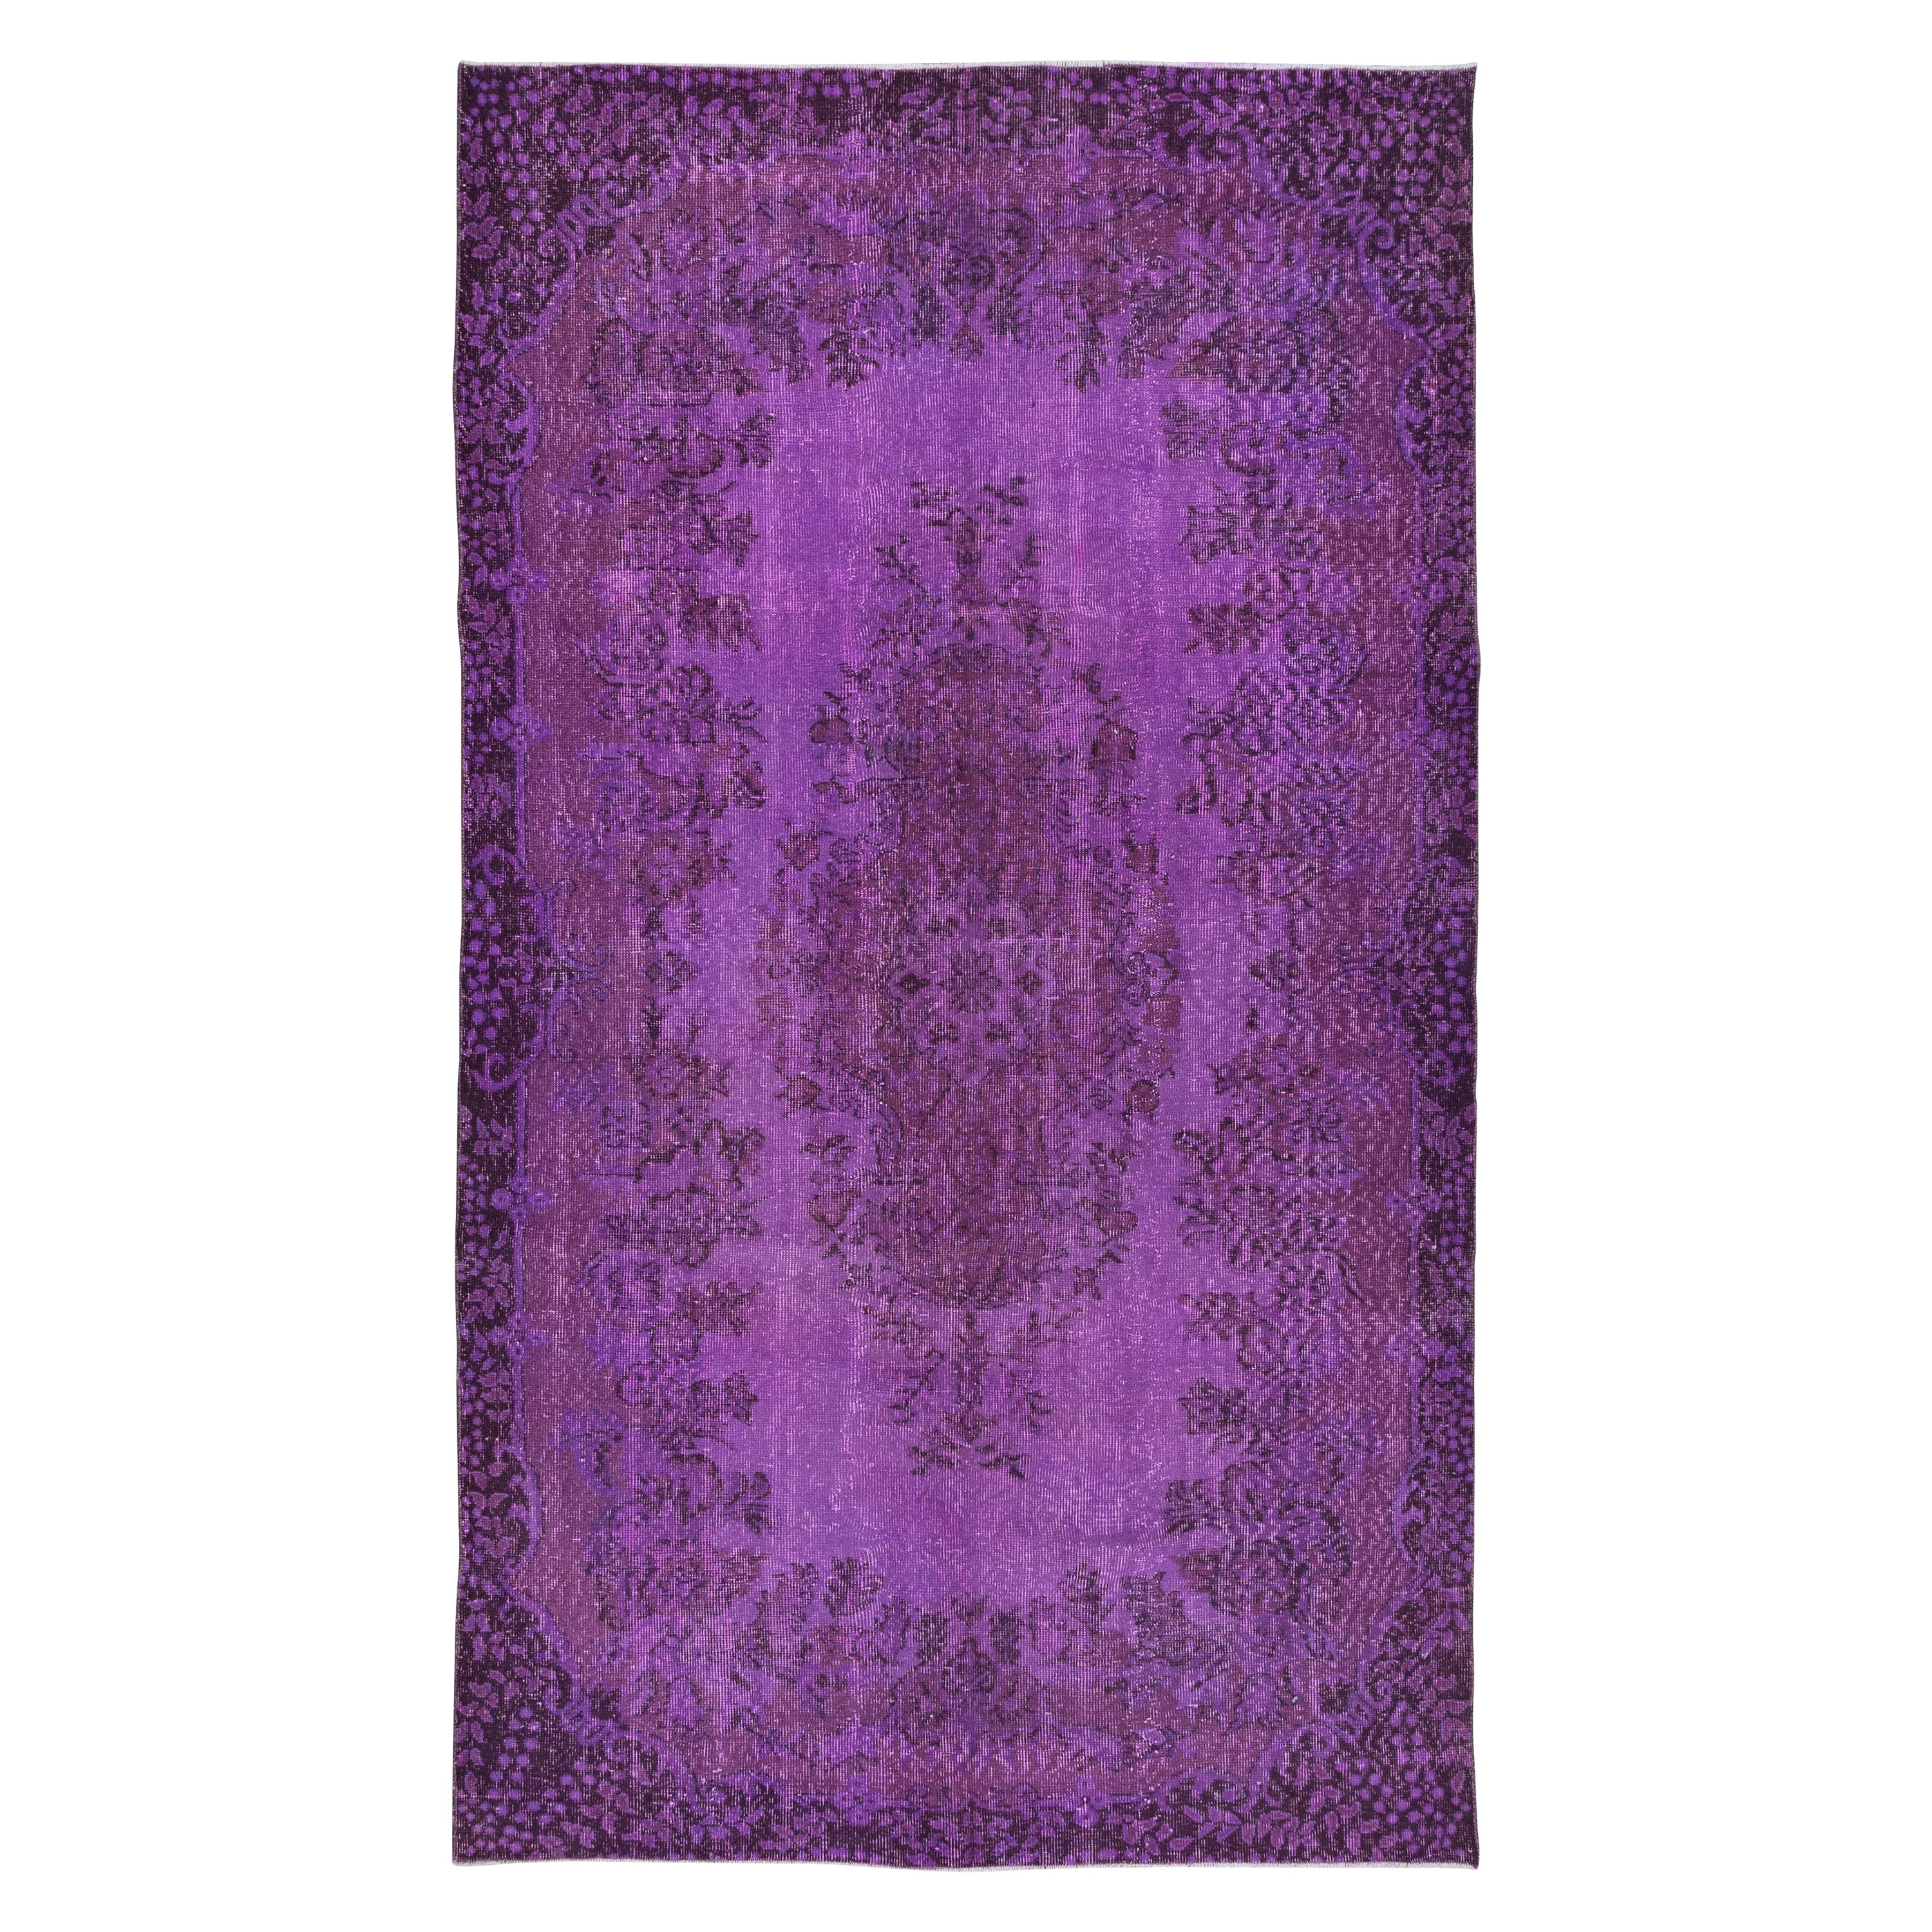 5.7x10 Ft Handmade Turkish Sparta Area Rug in Purple, Ideal for Modern Interiors